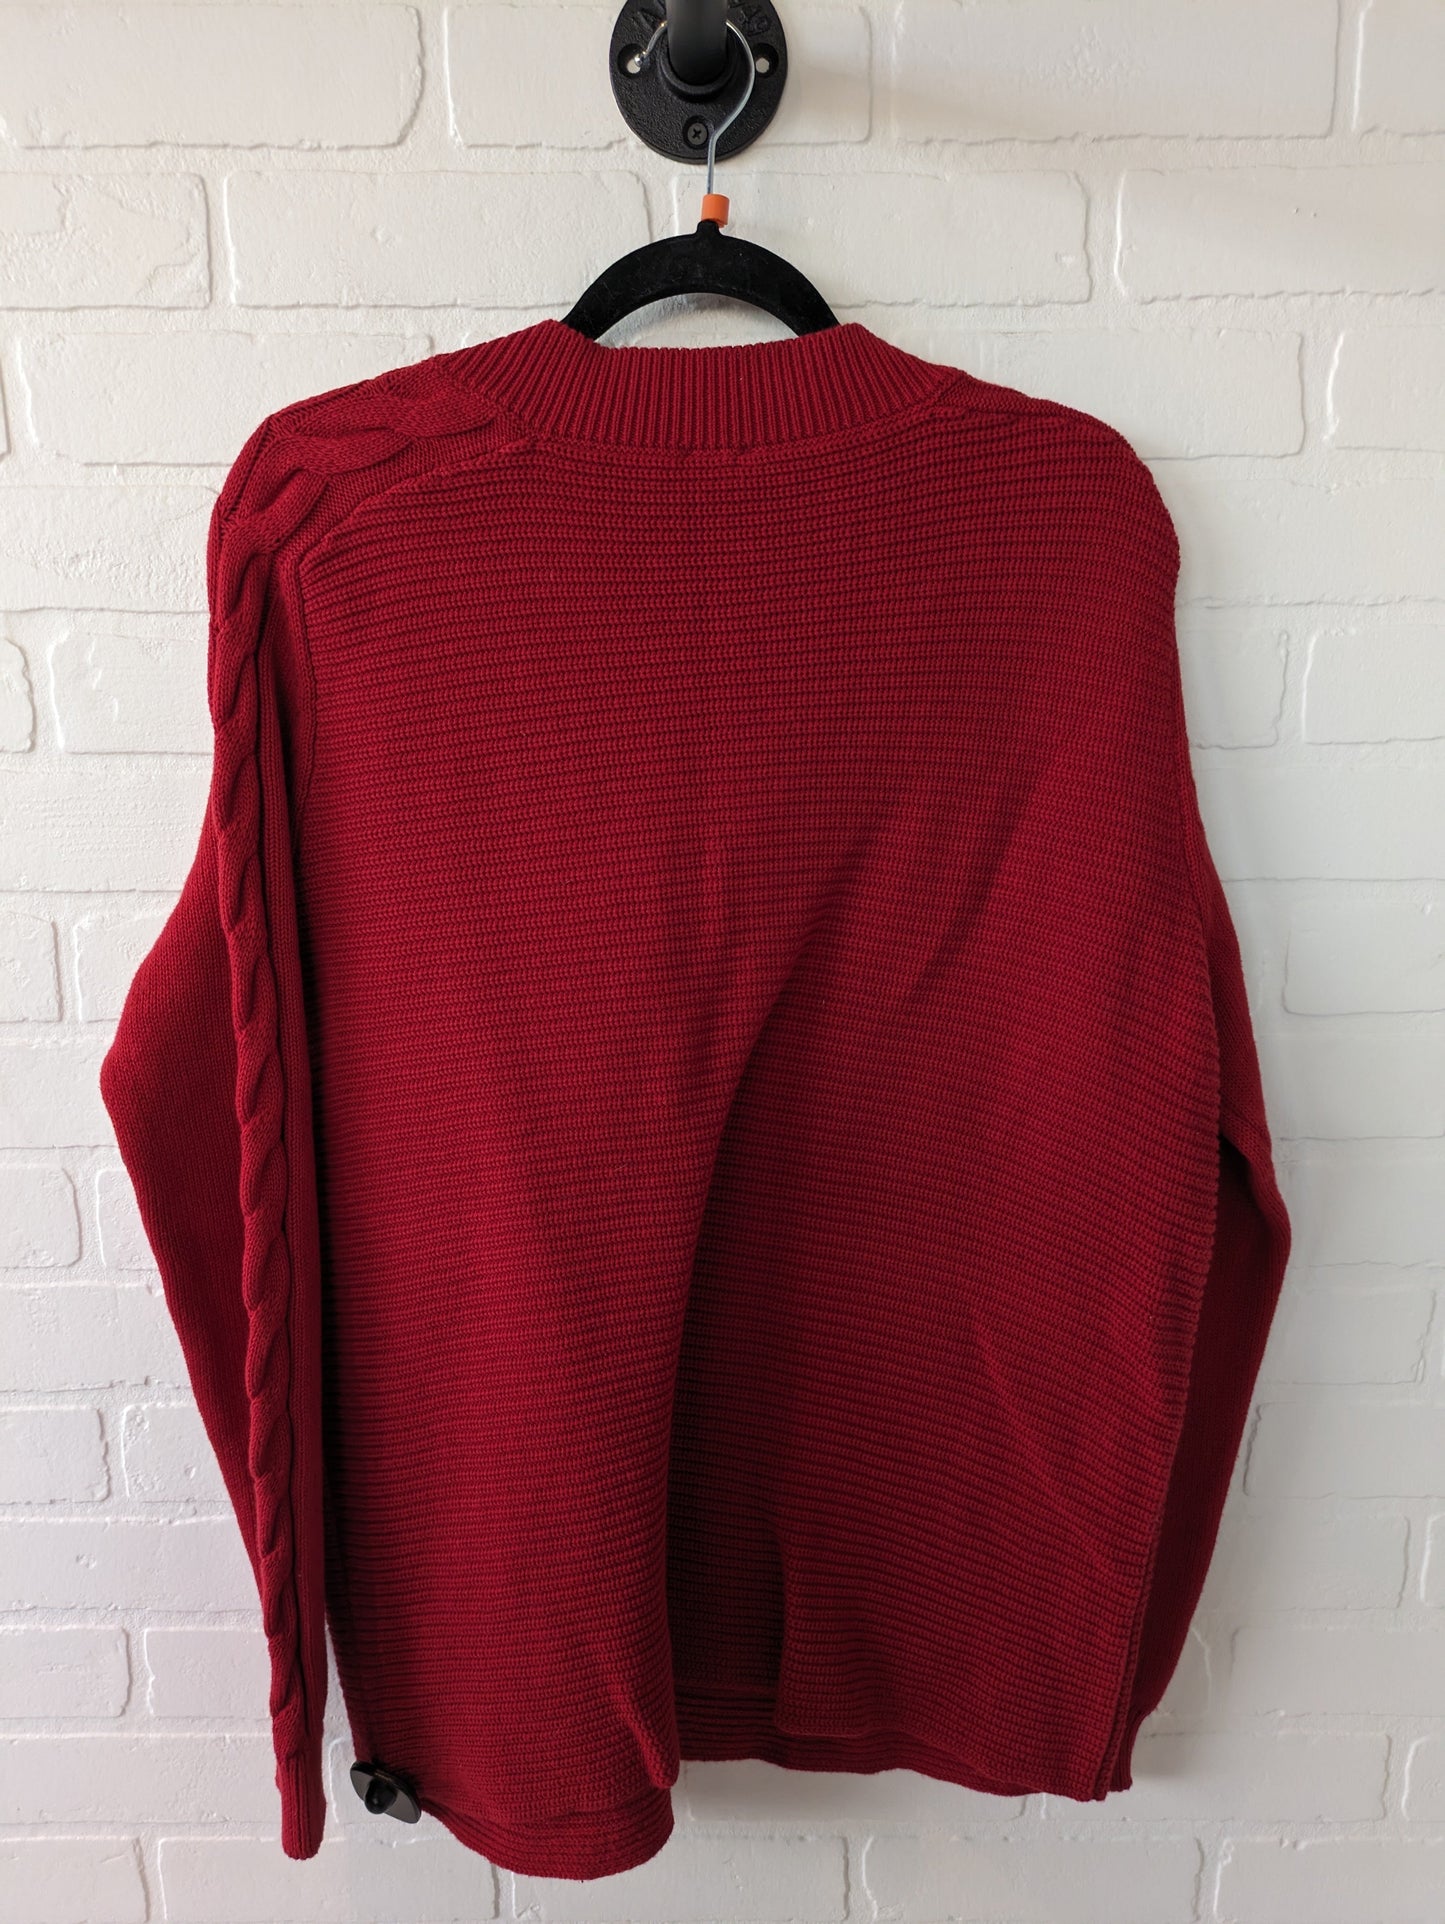 Sweater By Cabi  Size: M